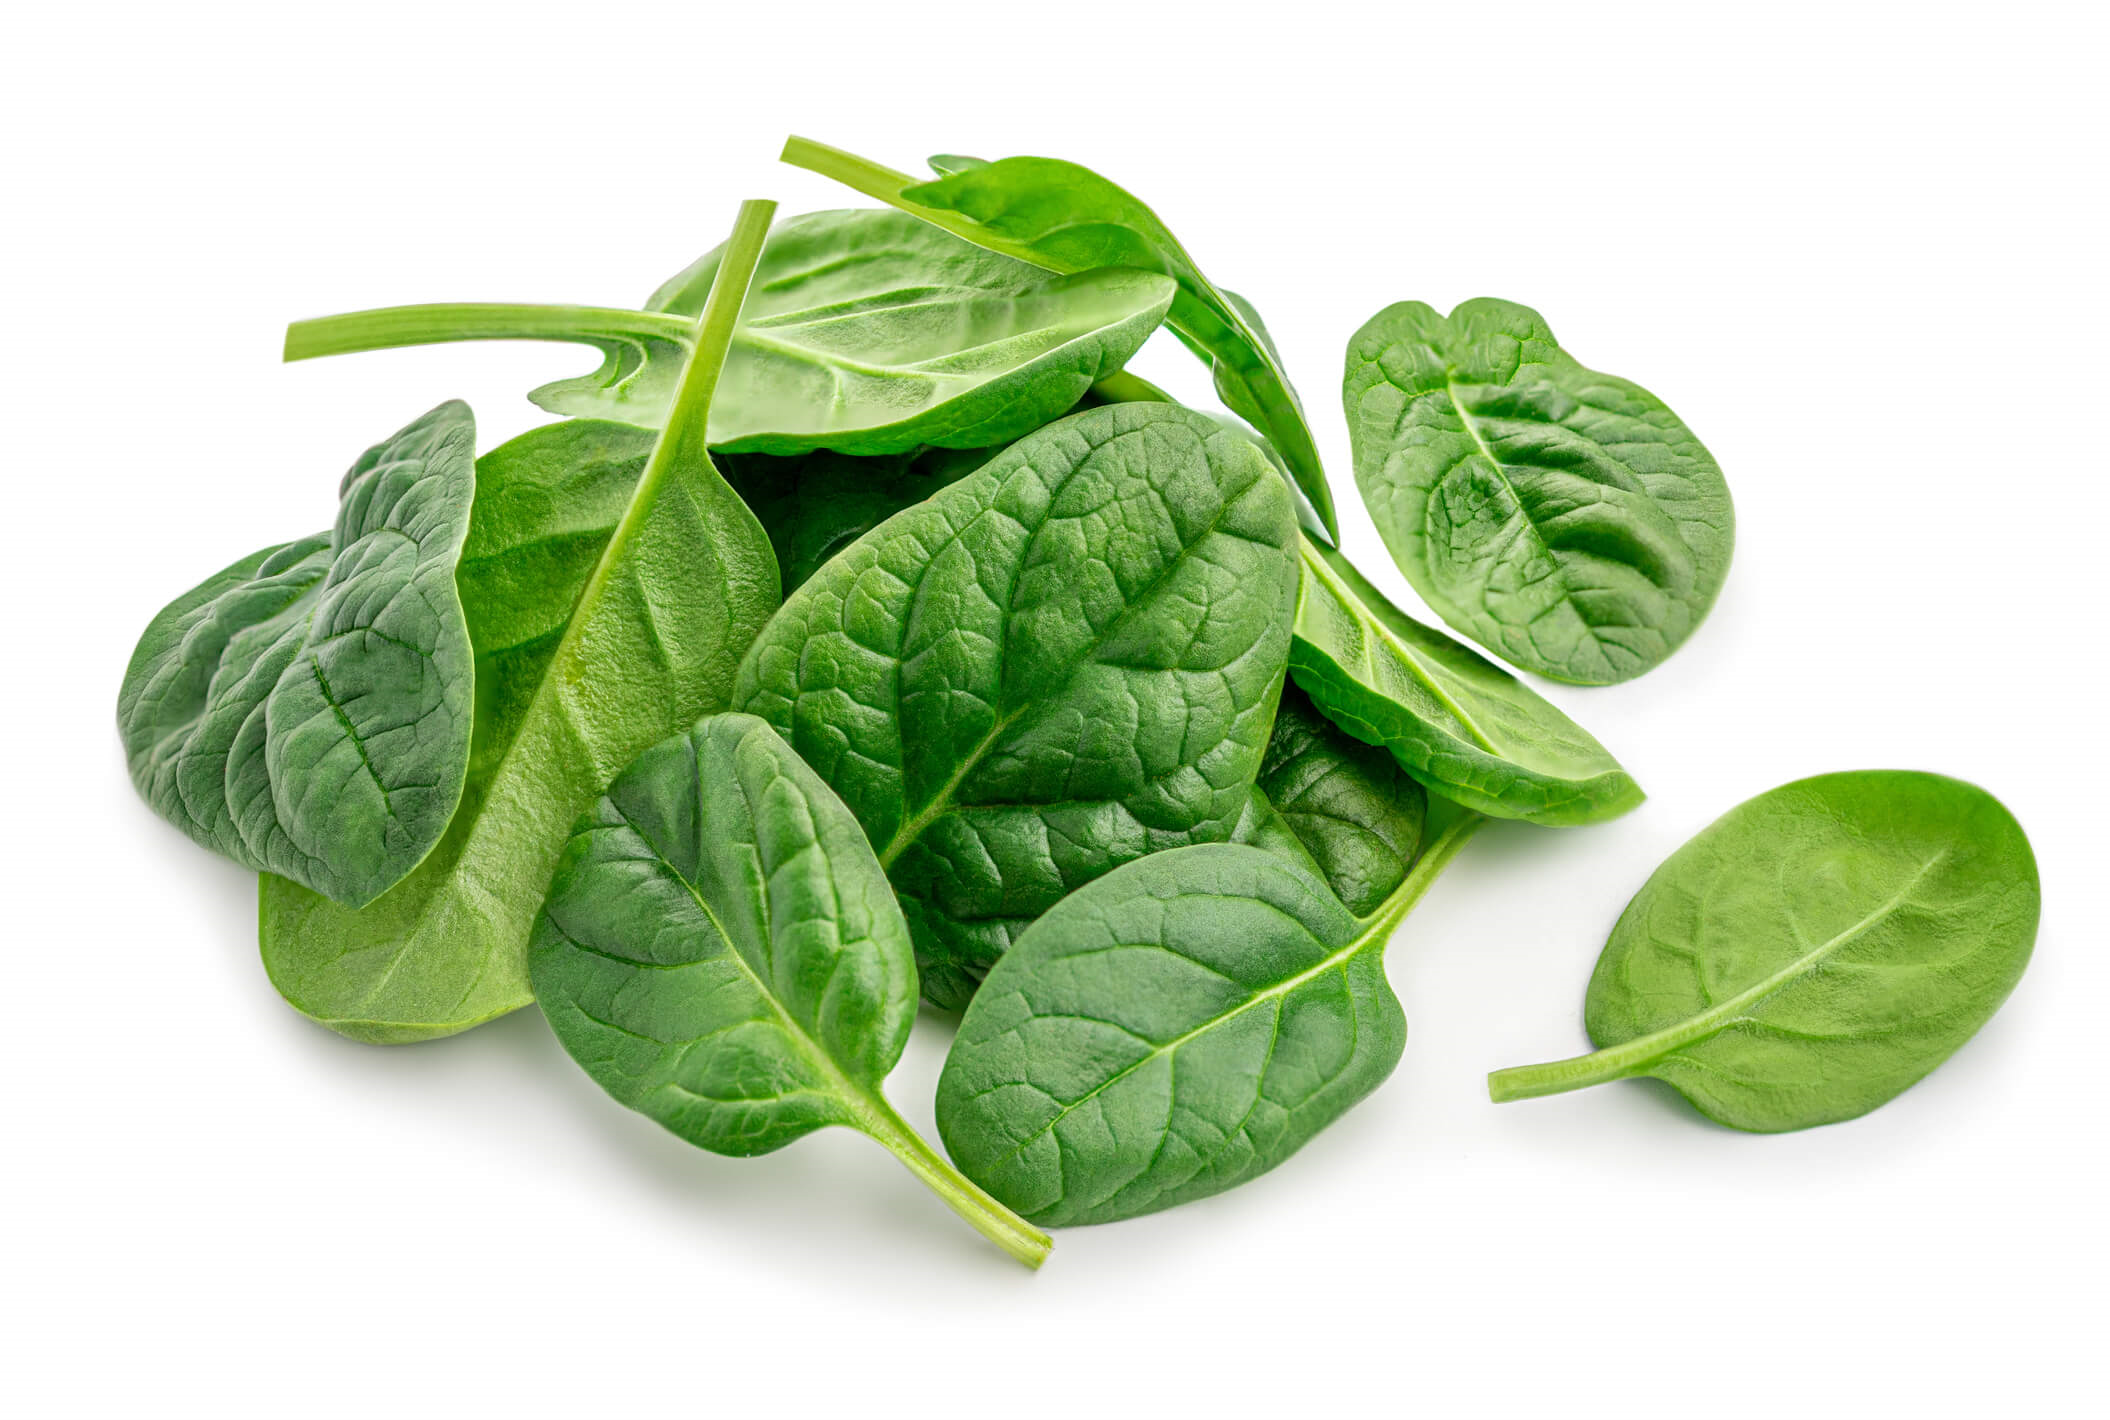 A pile of spinach leaves
